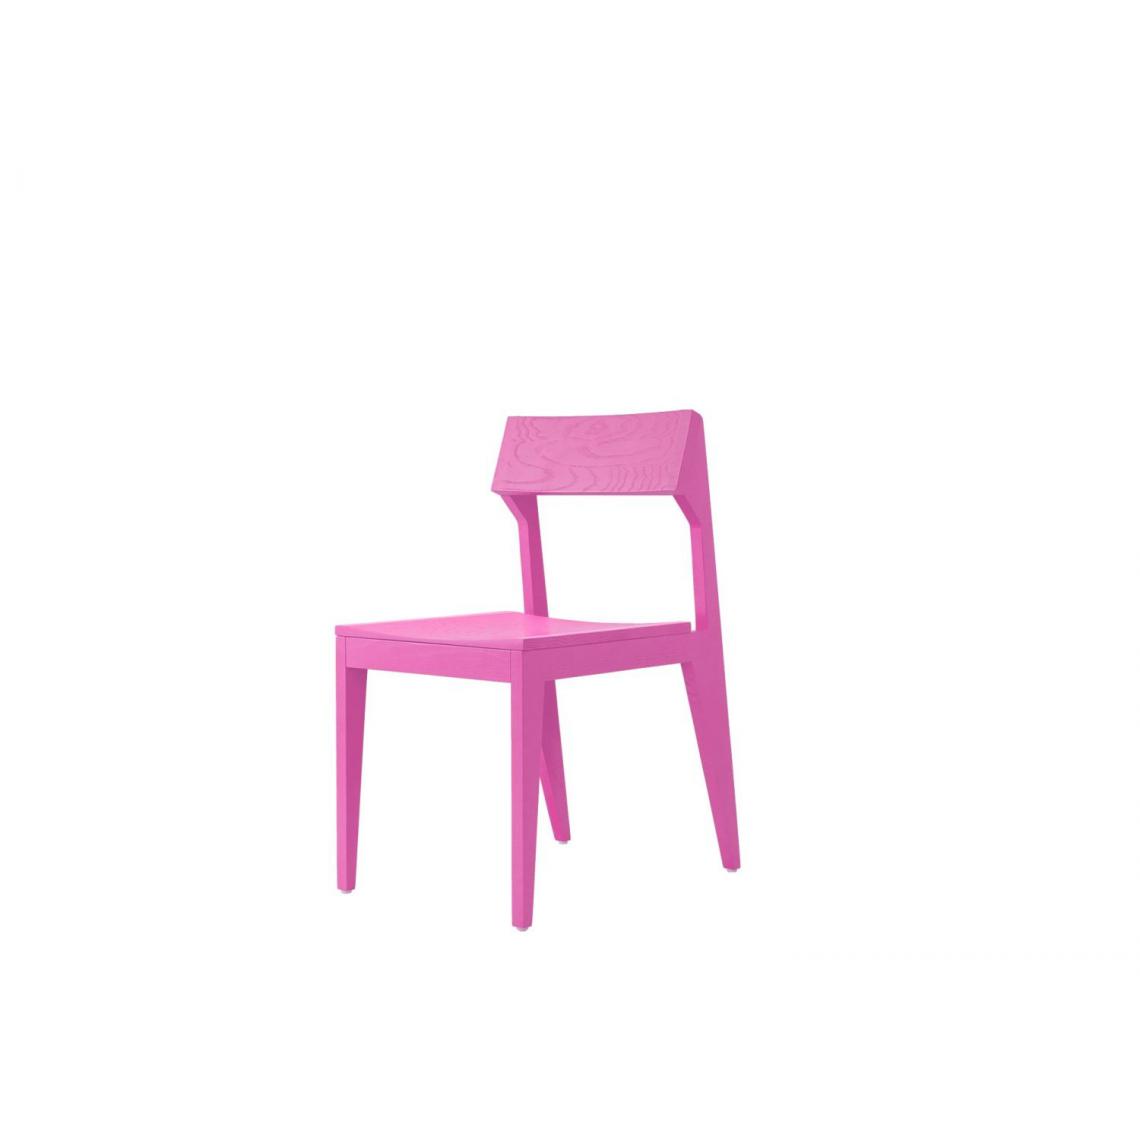 Objekte Unserer Tage - Chaise Schulz - miami pink - Chaises